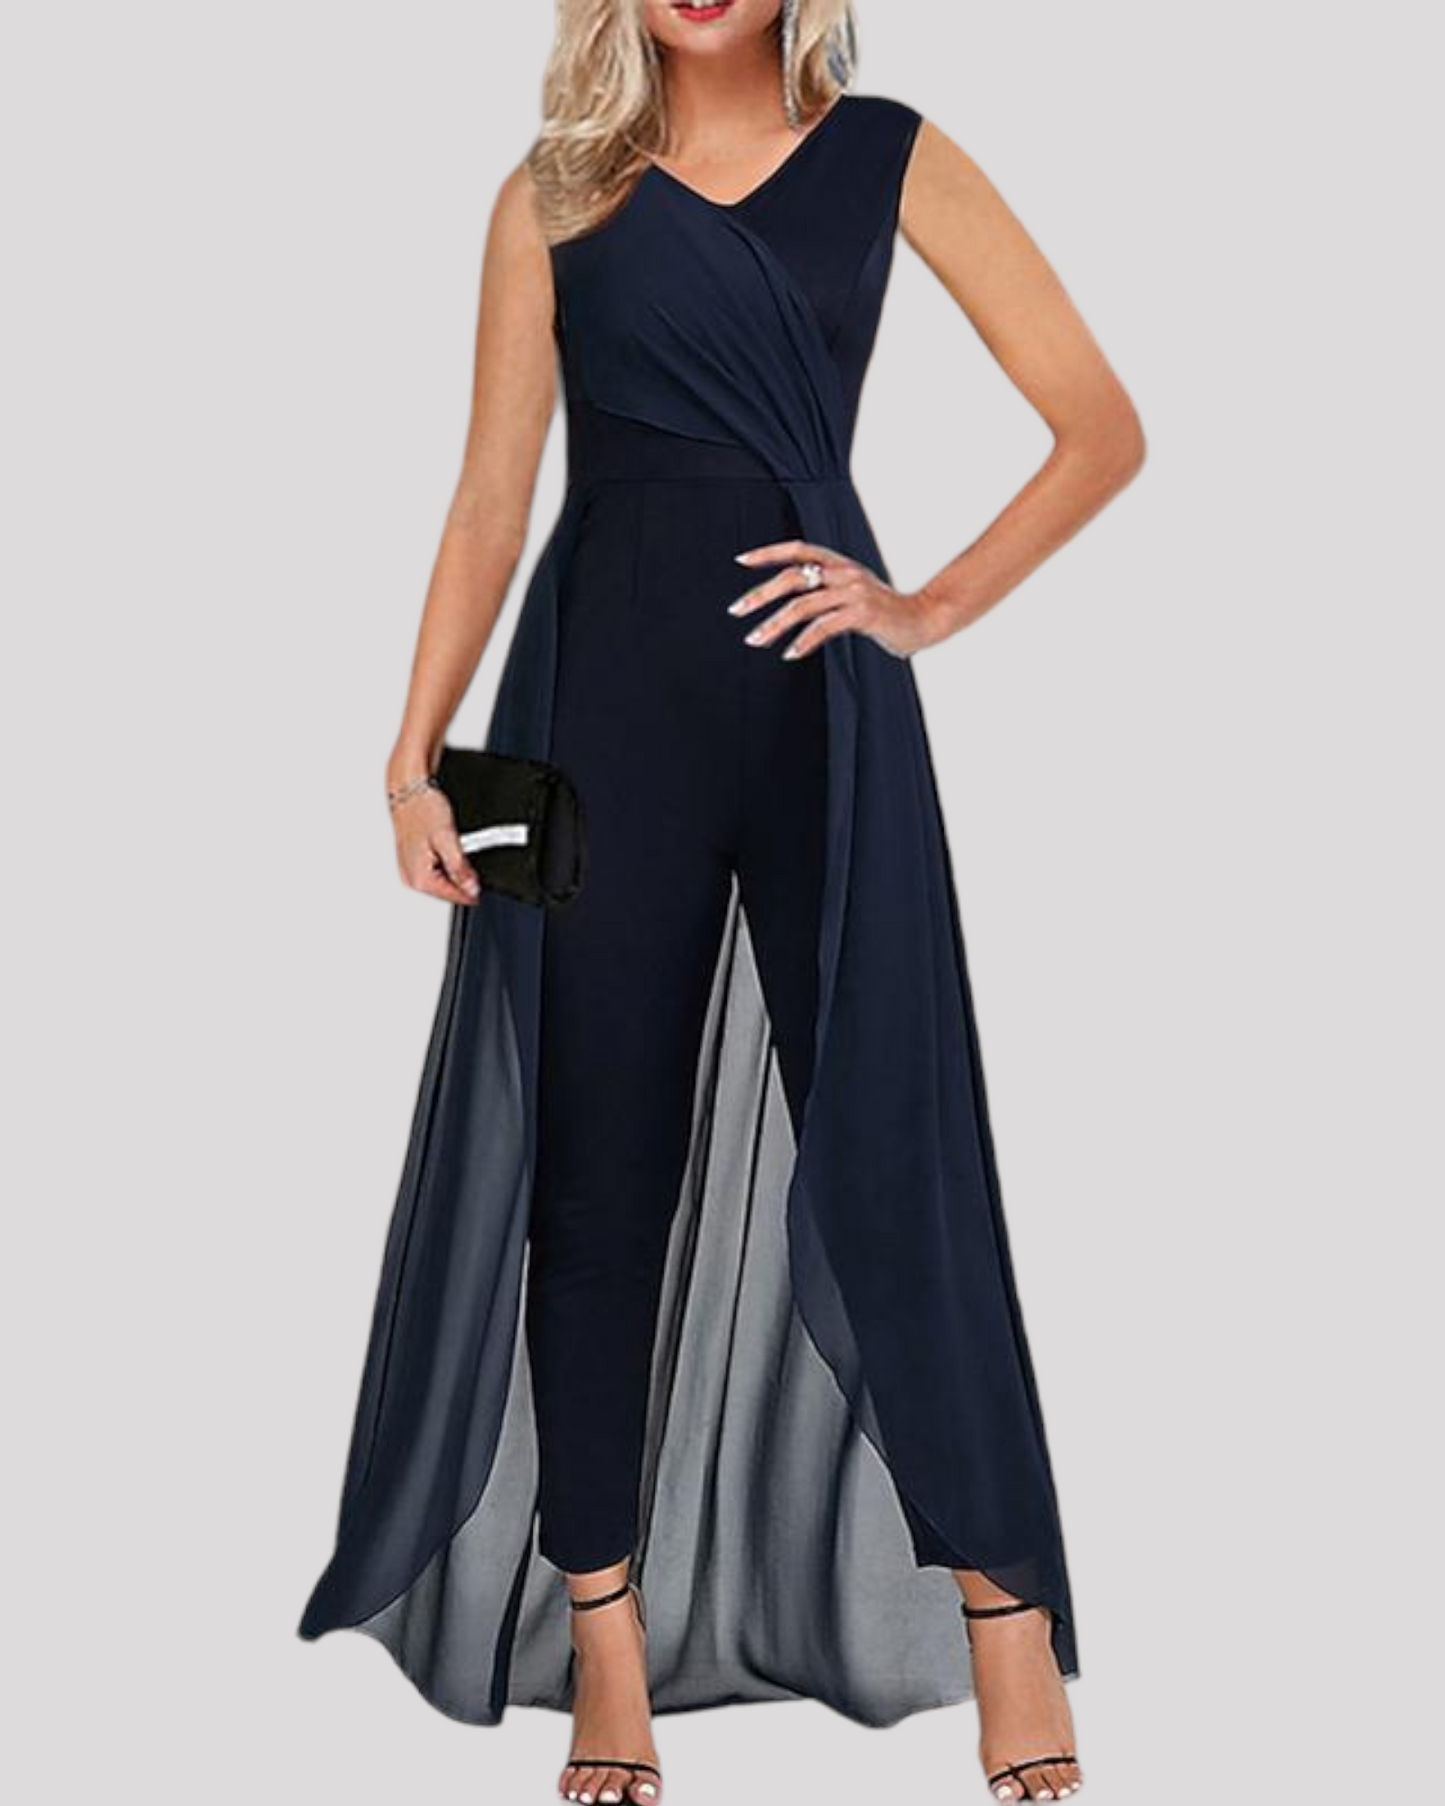 Elegant Jumpsuit with Skirt Overlay and Pleating Bodice Detail